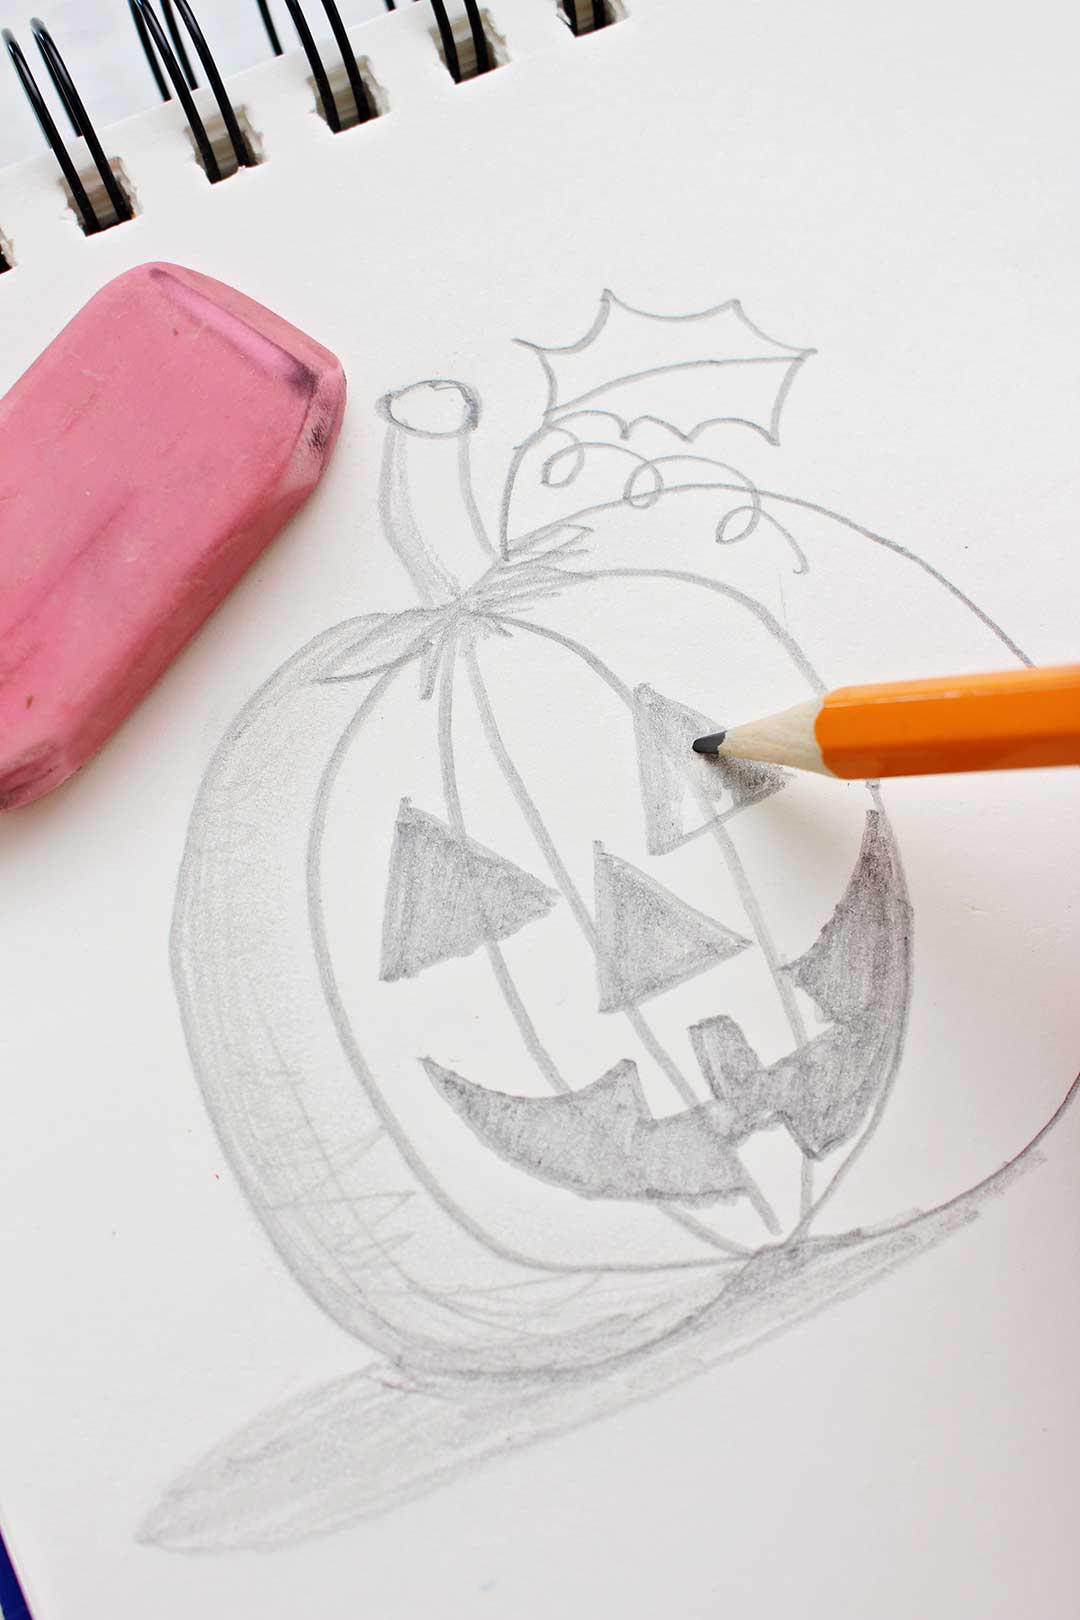 Halloween drawings] Easy to draw a cute Pumpkin - EASY TO DRAW EVERYTHING